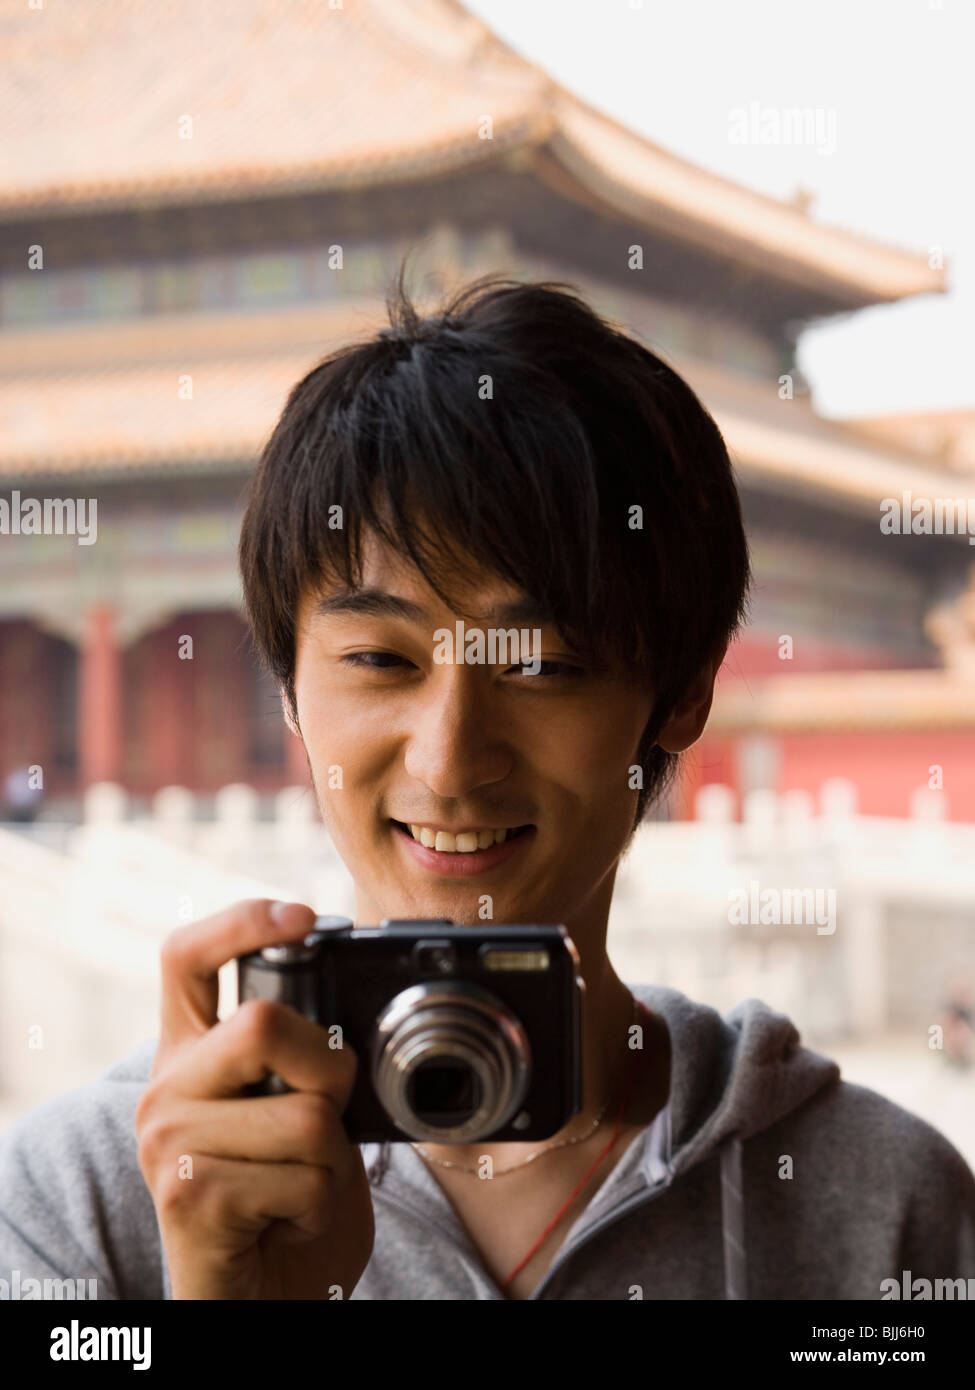 Teenage boy outdoors smiling with digital camera Banque D'Images